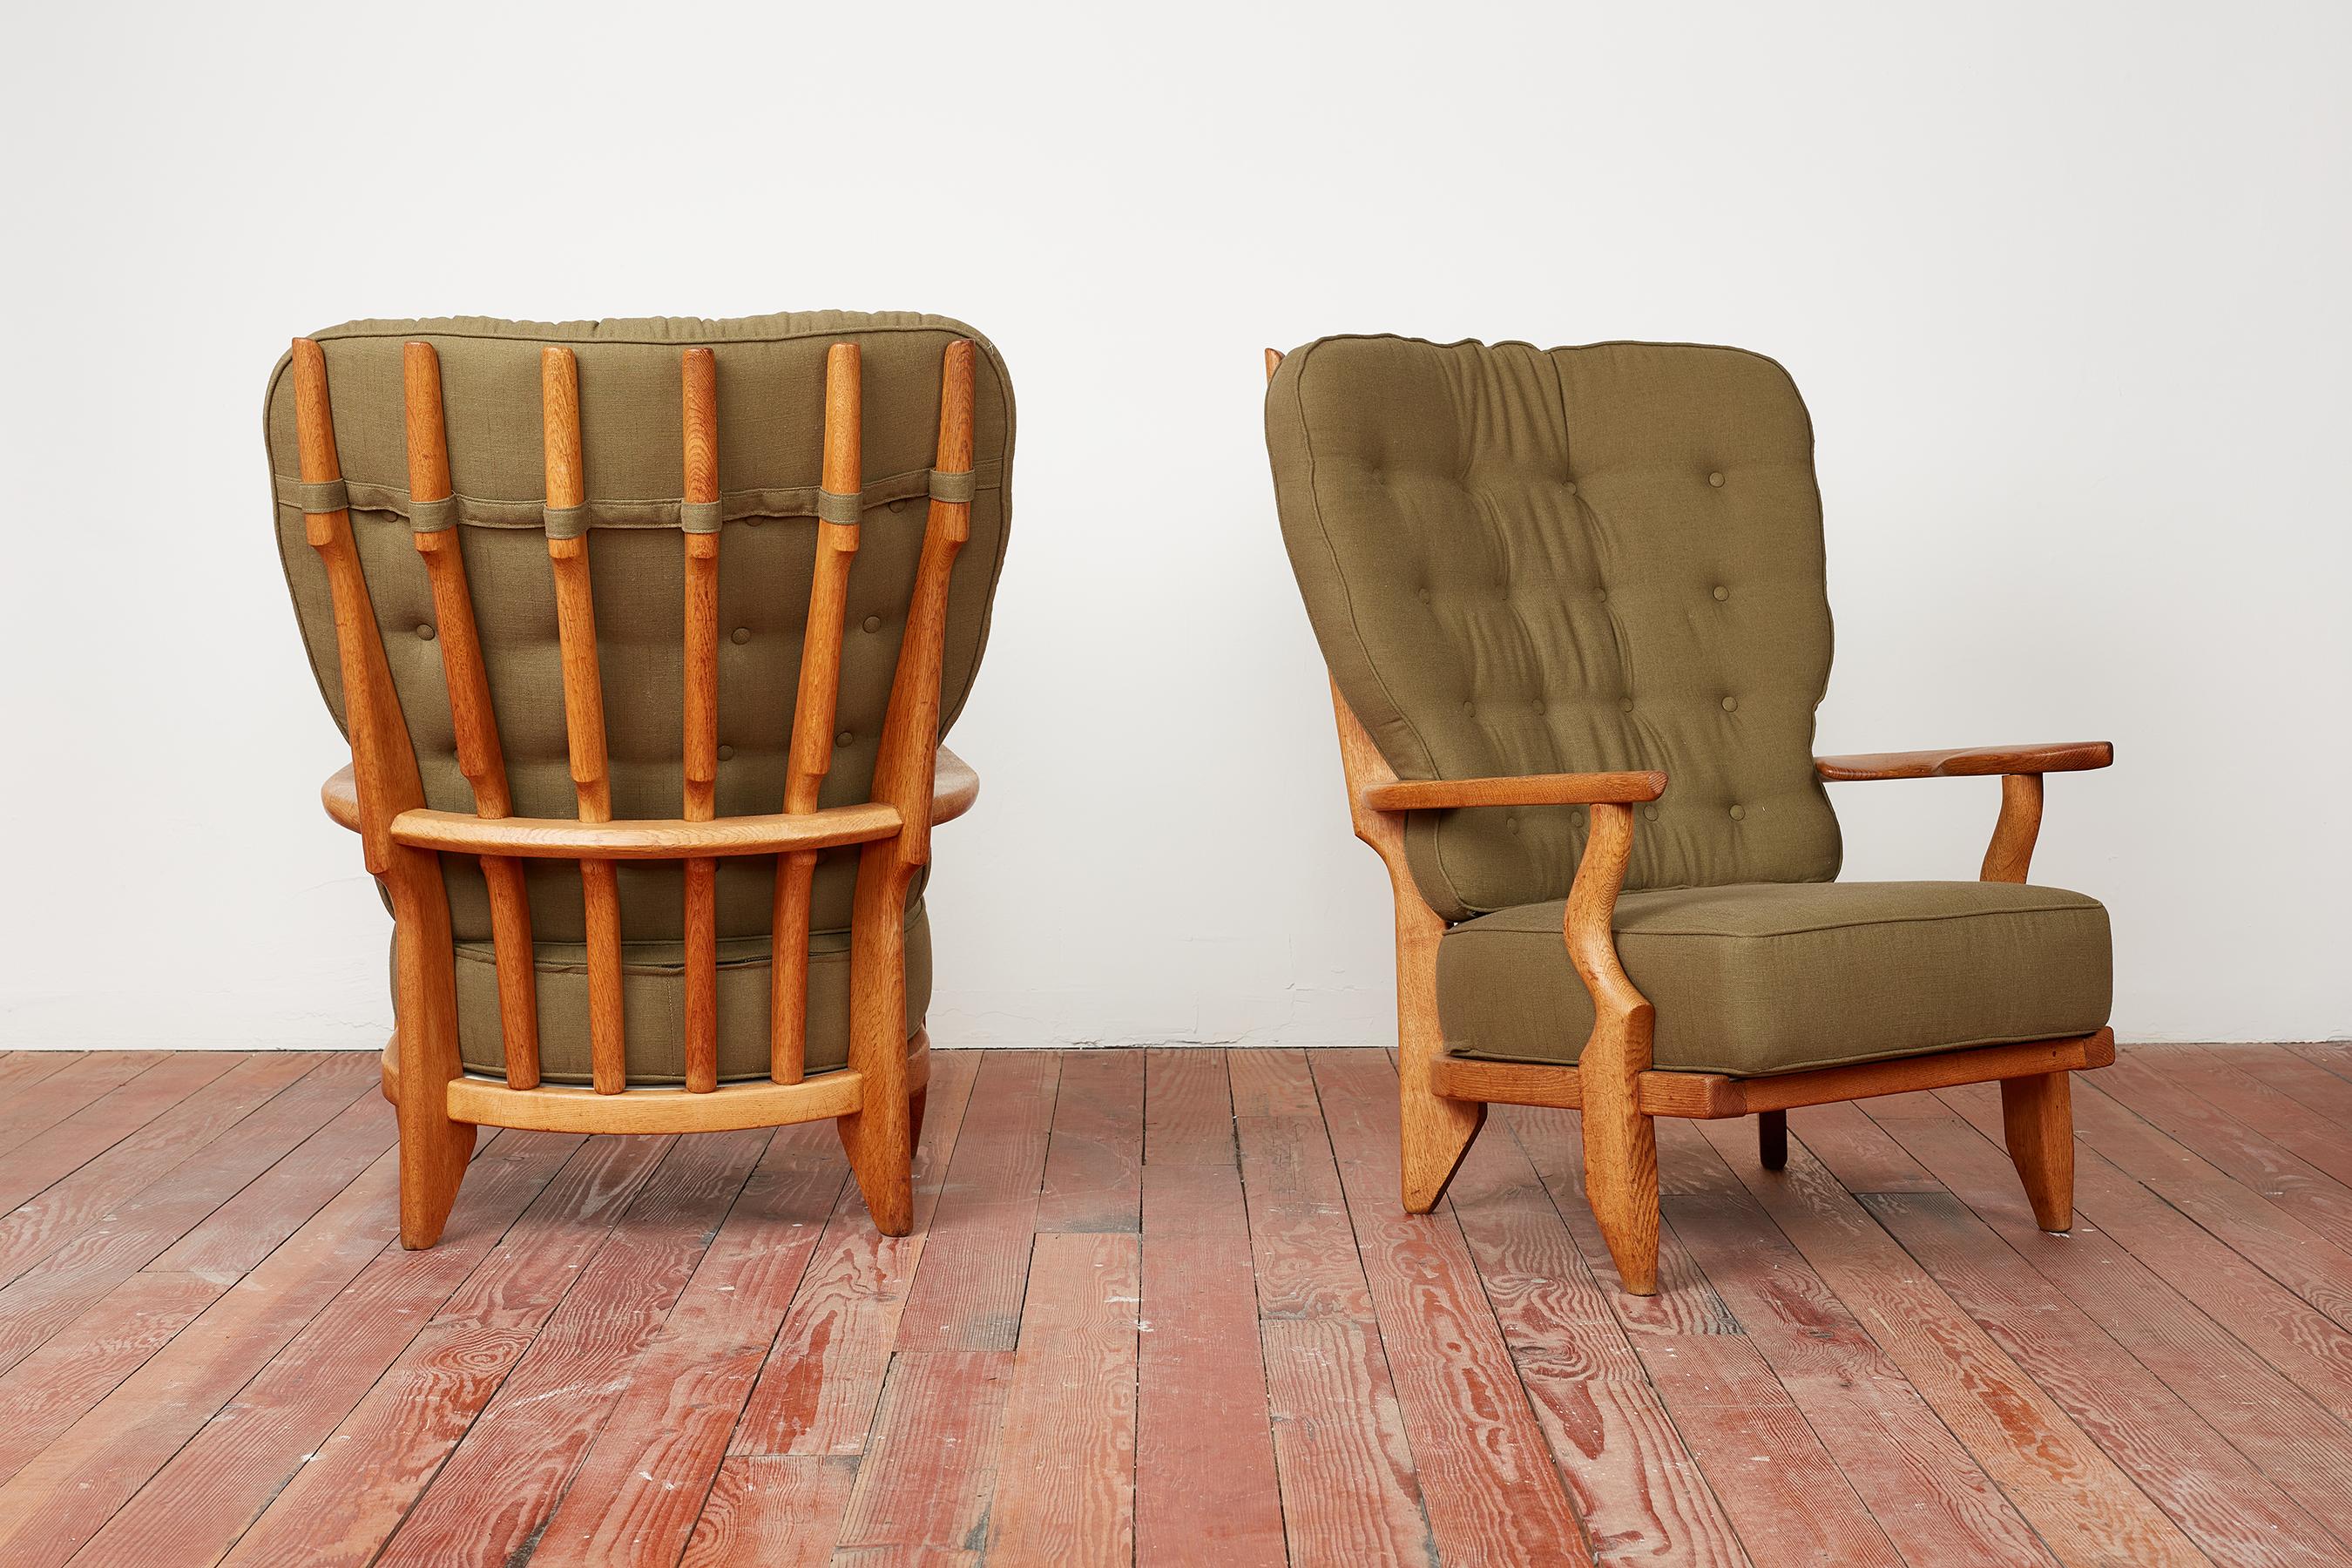 Guillerme & Chambron pair of chairs in oak with floating arms and spindle backs.
